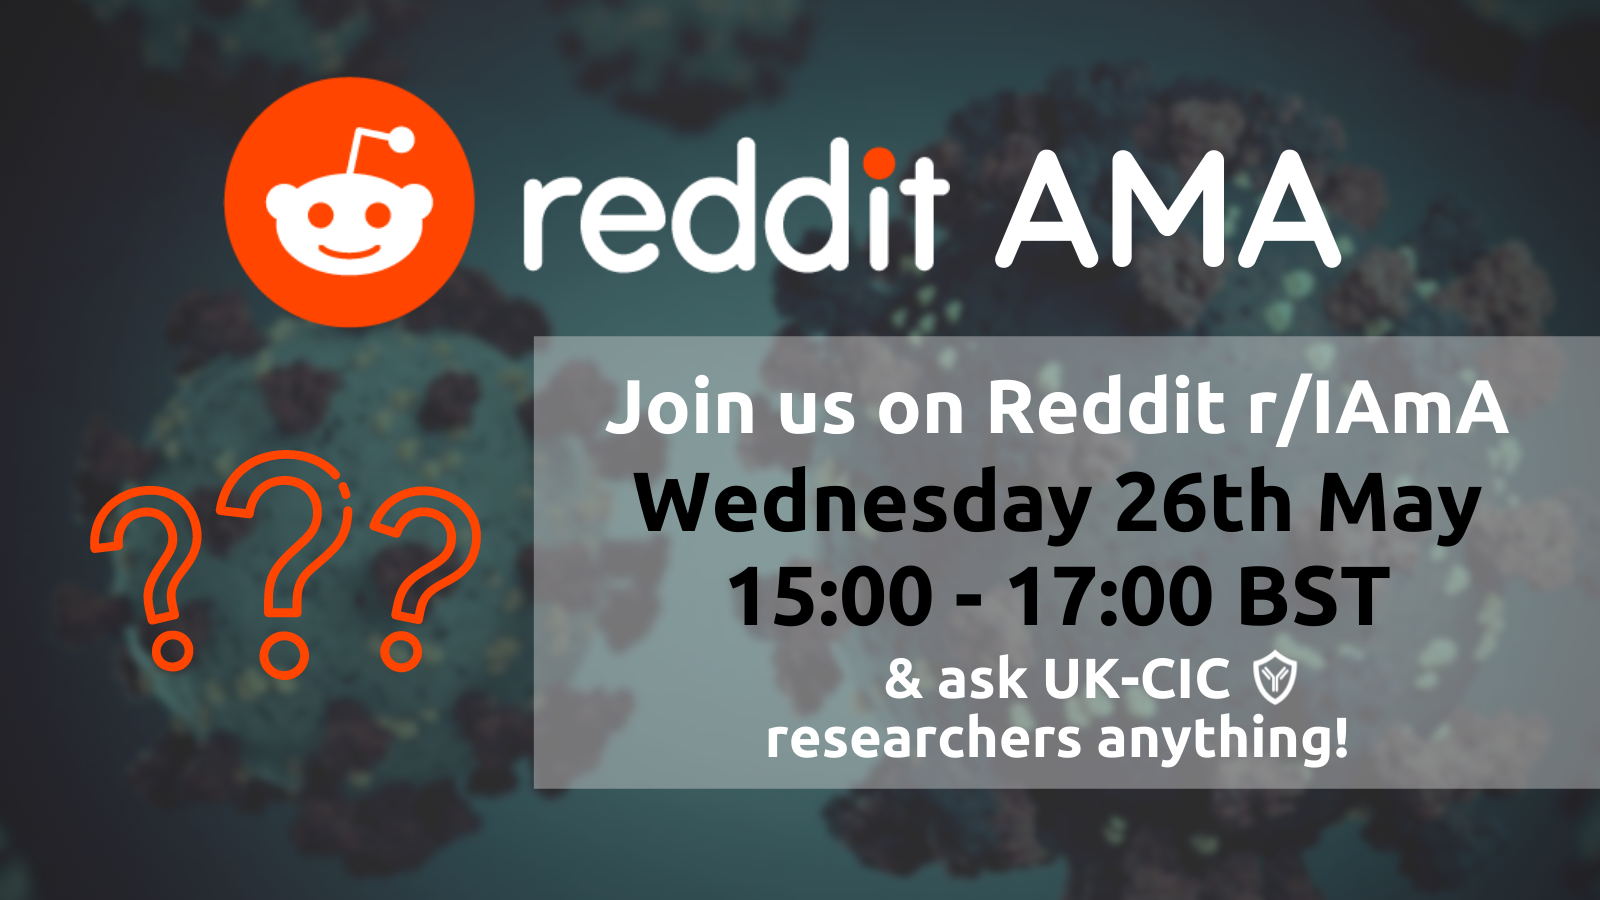 Join us on Reddit r/IAmA on Wednesday 26 May, 15:00 BST, and ask UK-CIC researchers anything